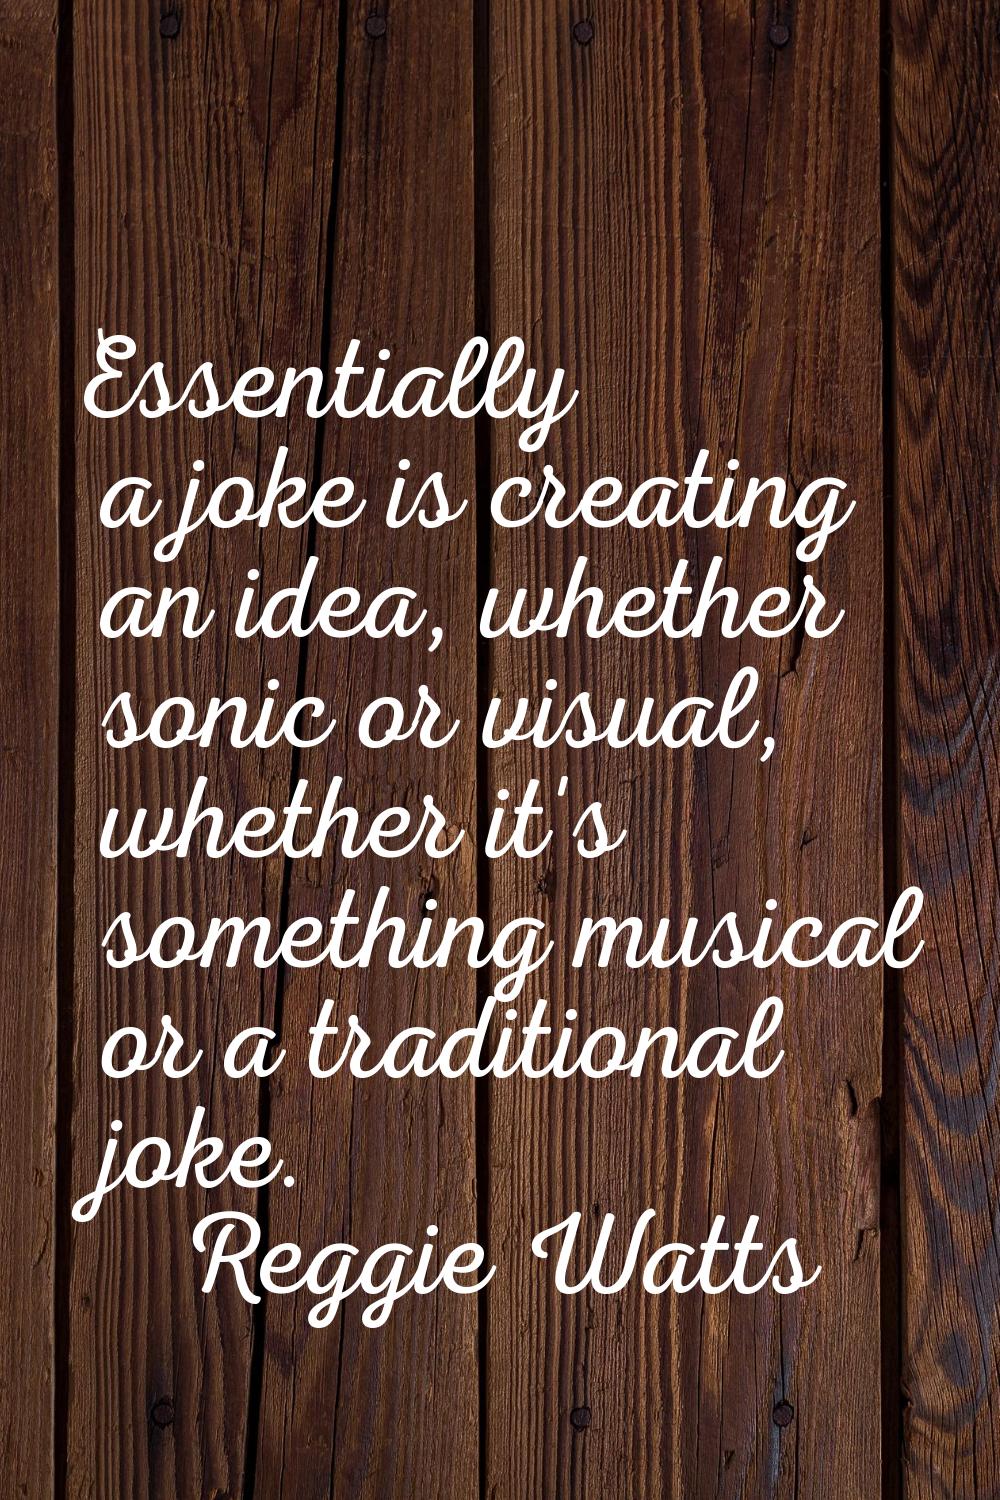 Essentially a joke is creating an idea, whether sonic or visual, whether it's something musical or 